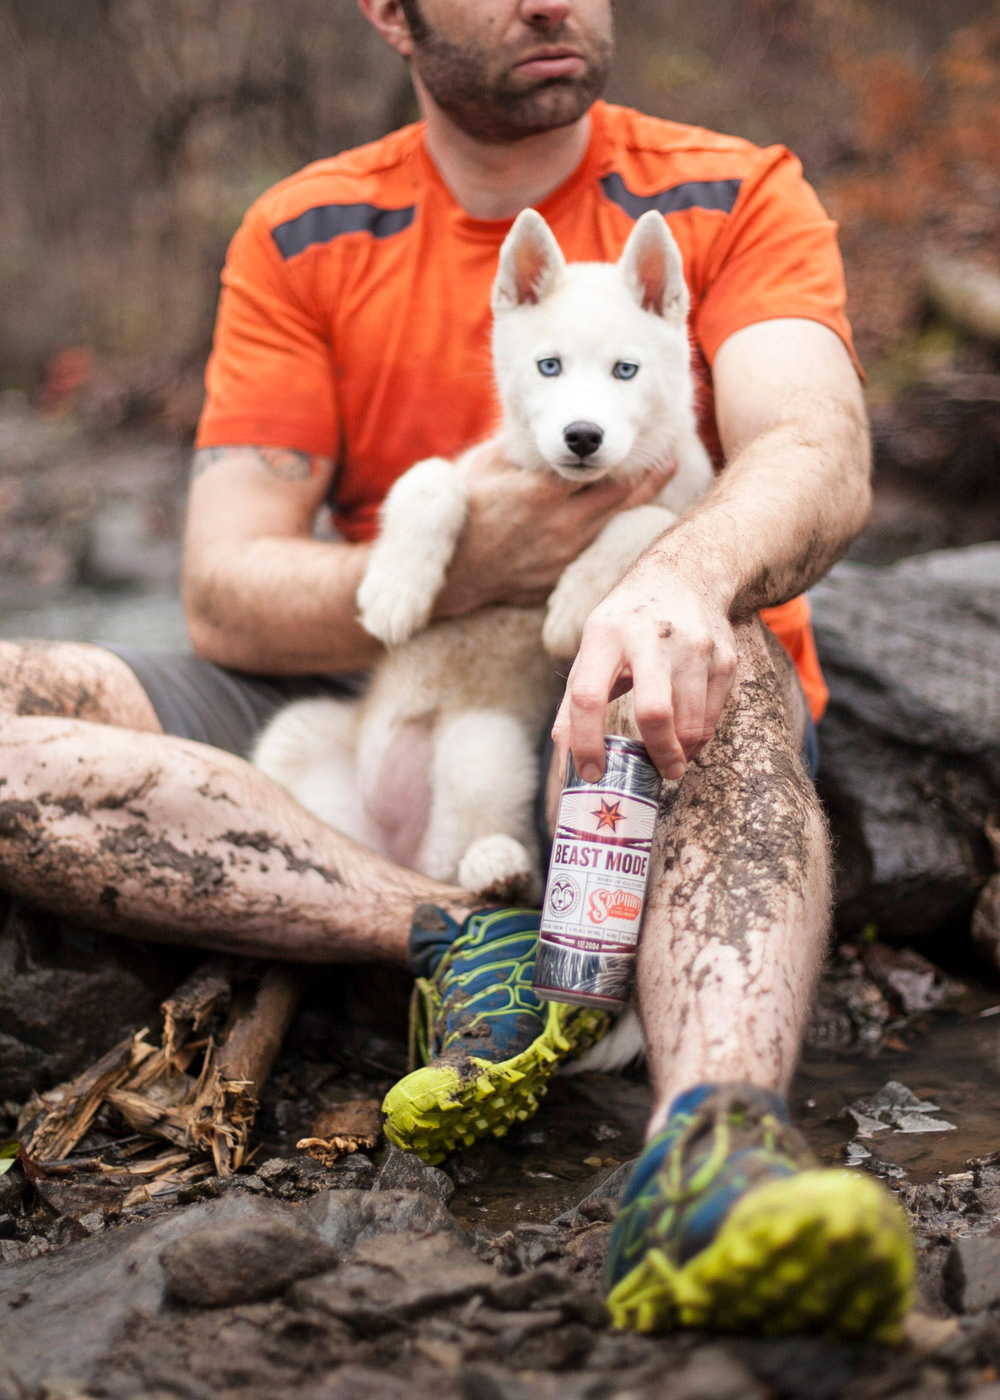 Editorial lifestyle photo of a man outdoors with muddy clothing and a dog holding a canned beverage